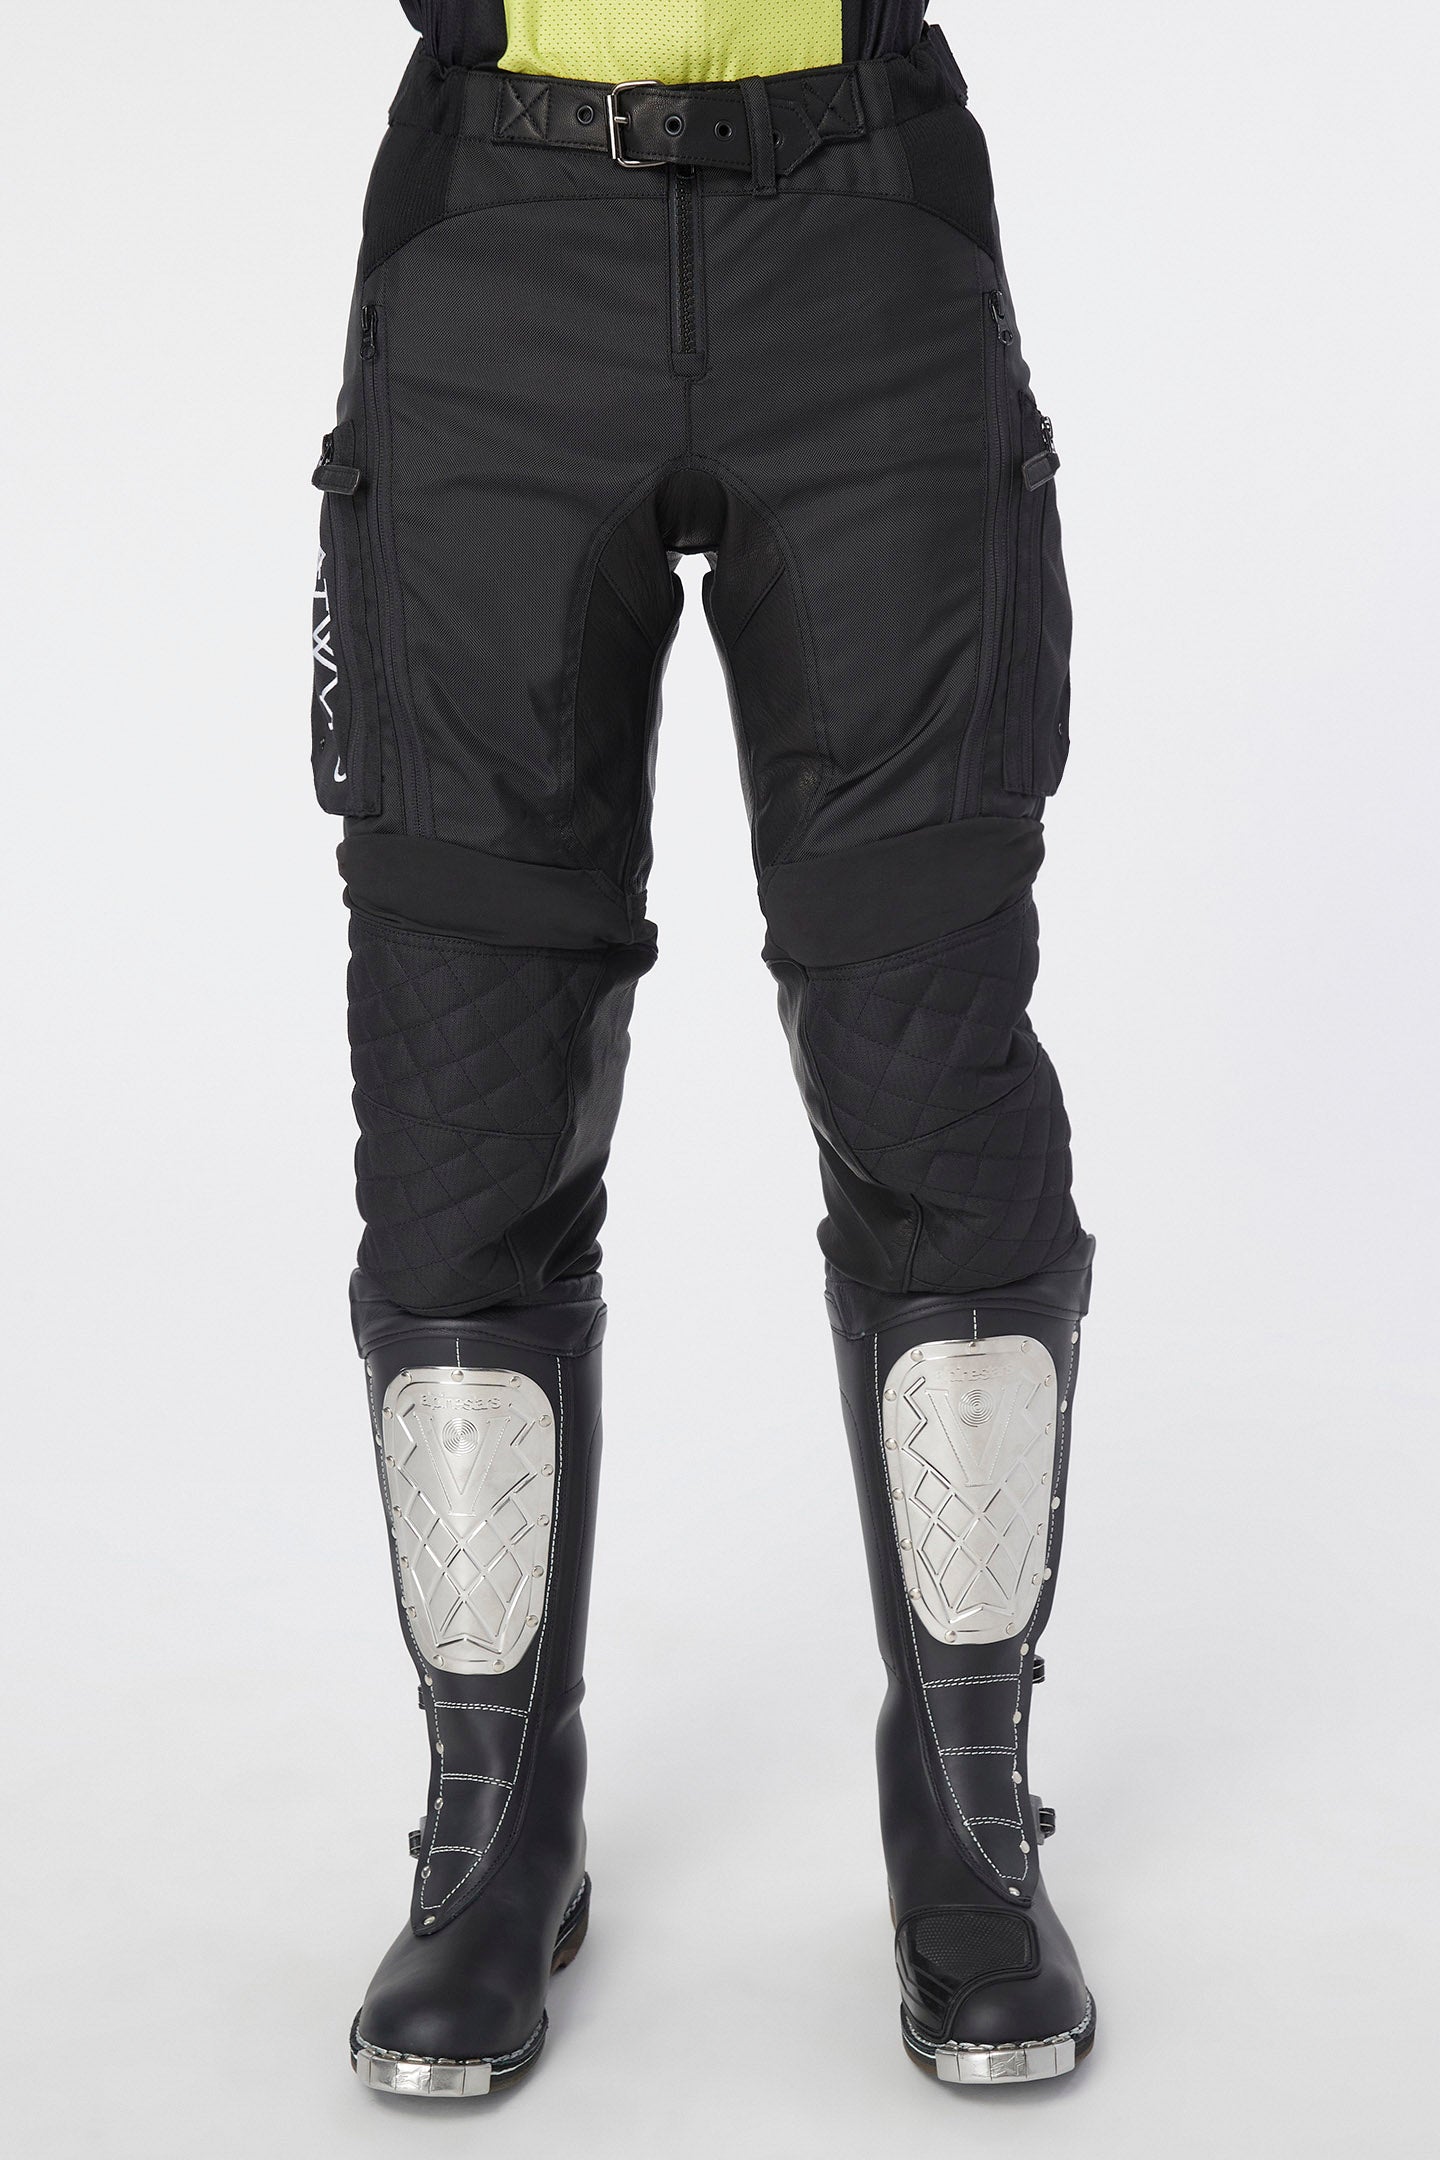 Velocity Off-Road Adventure Pants, ATWYLD